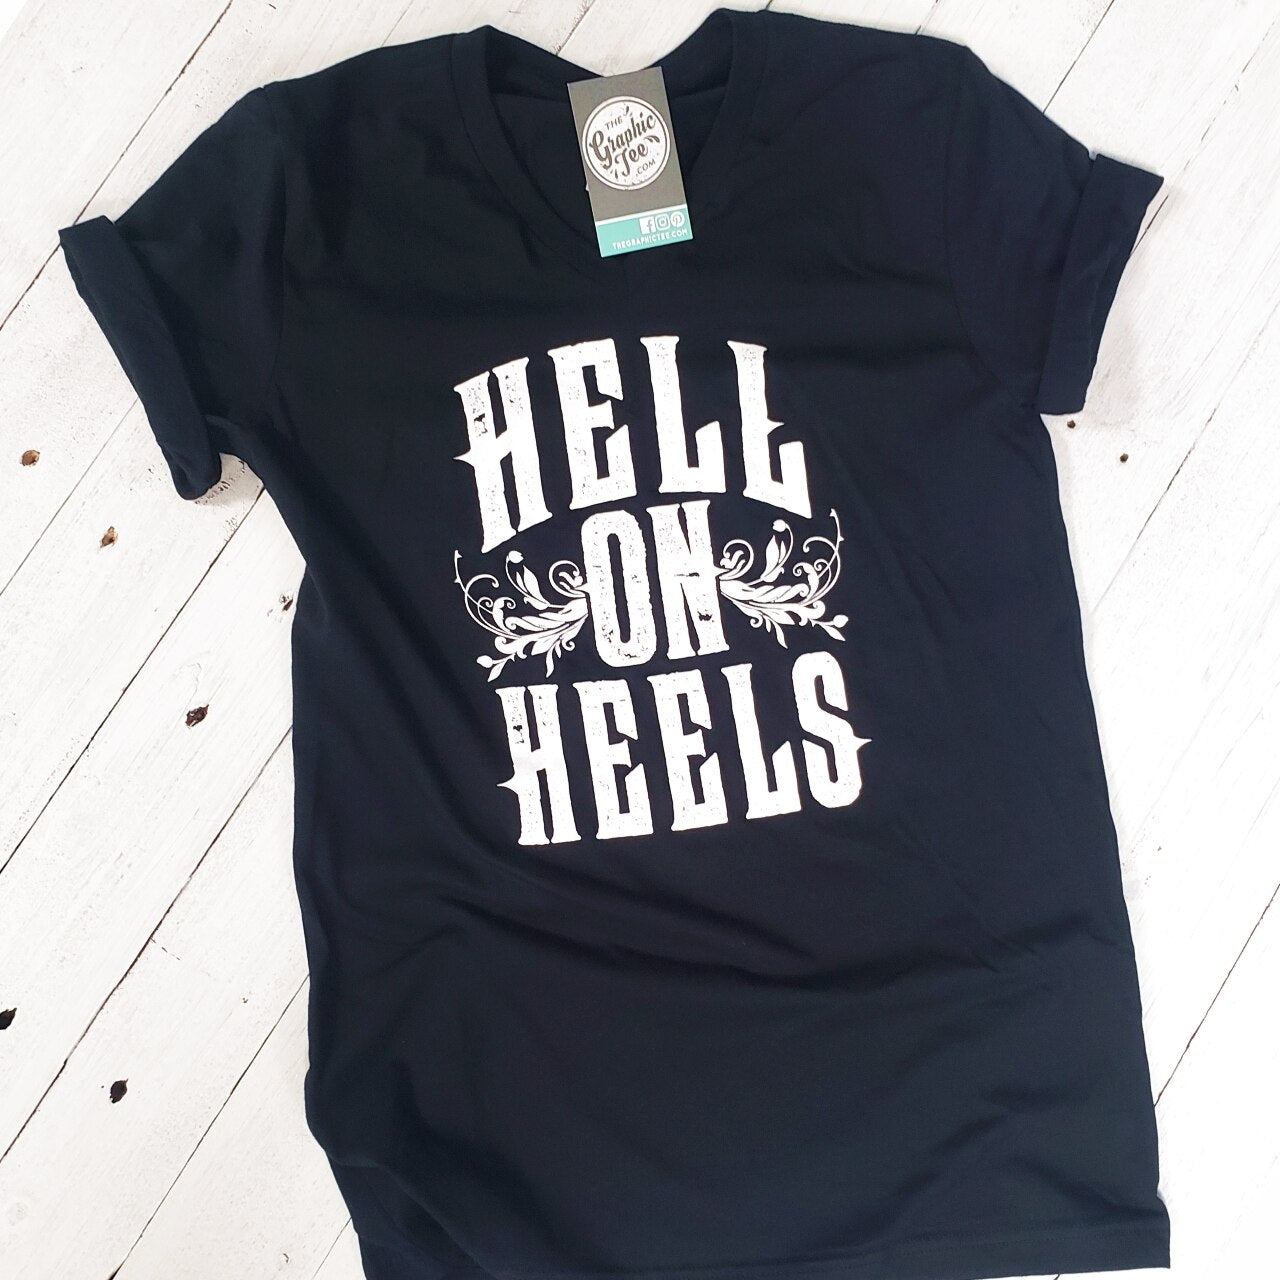 Hell on Heels - Unisex V-Neck Tee - The Graphic Tee